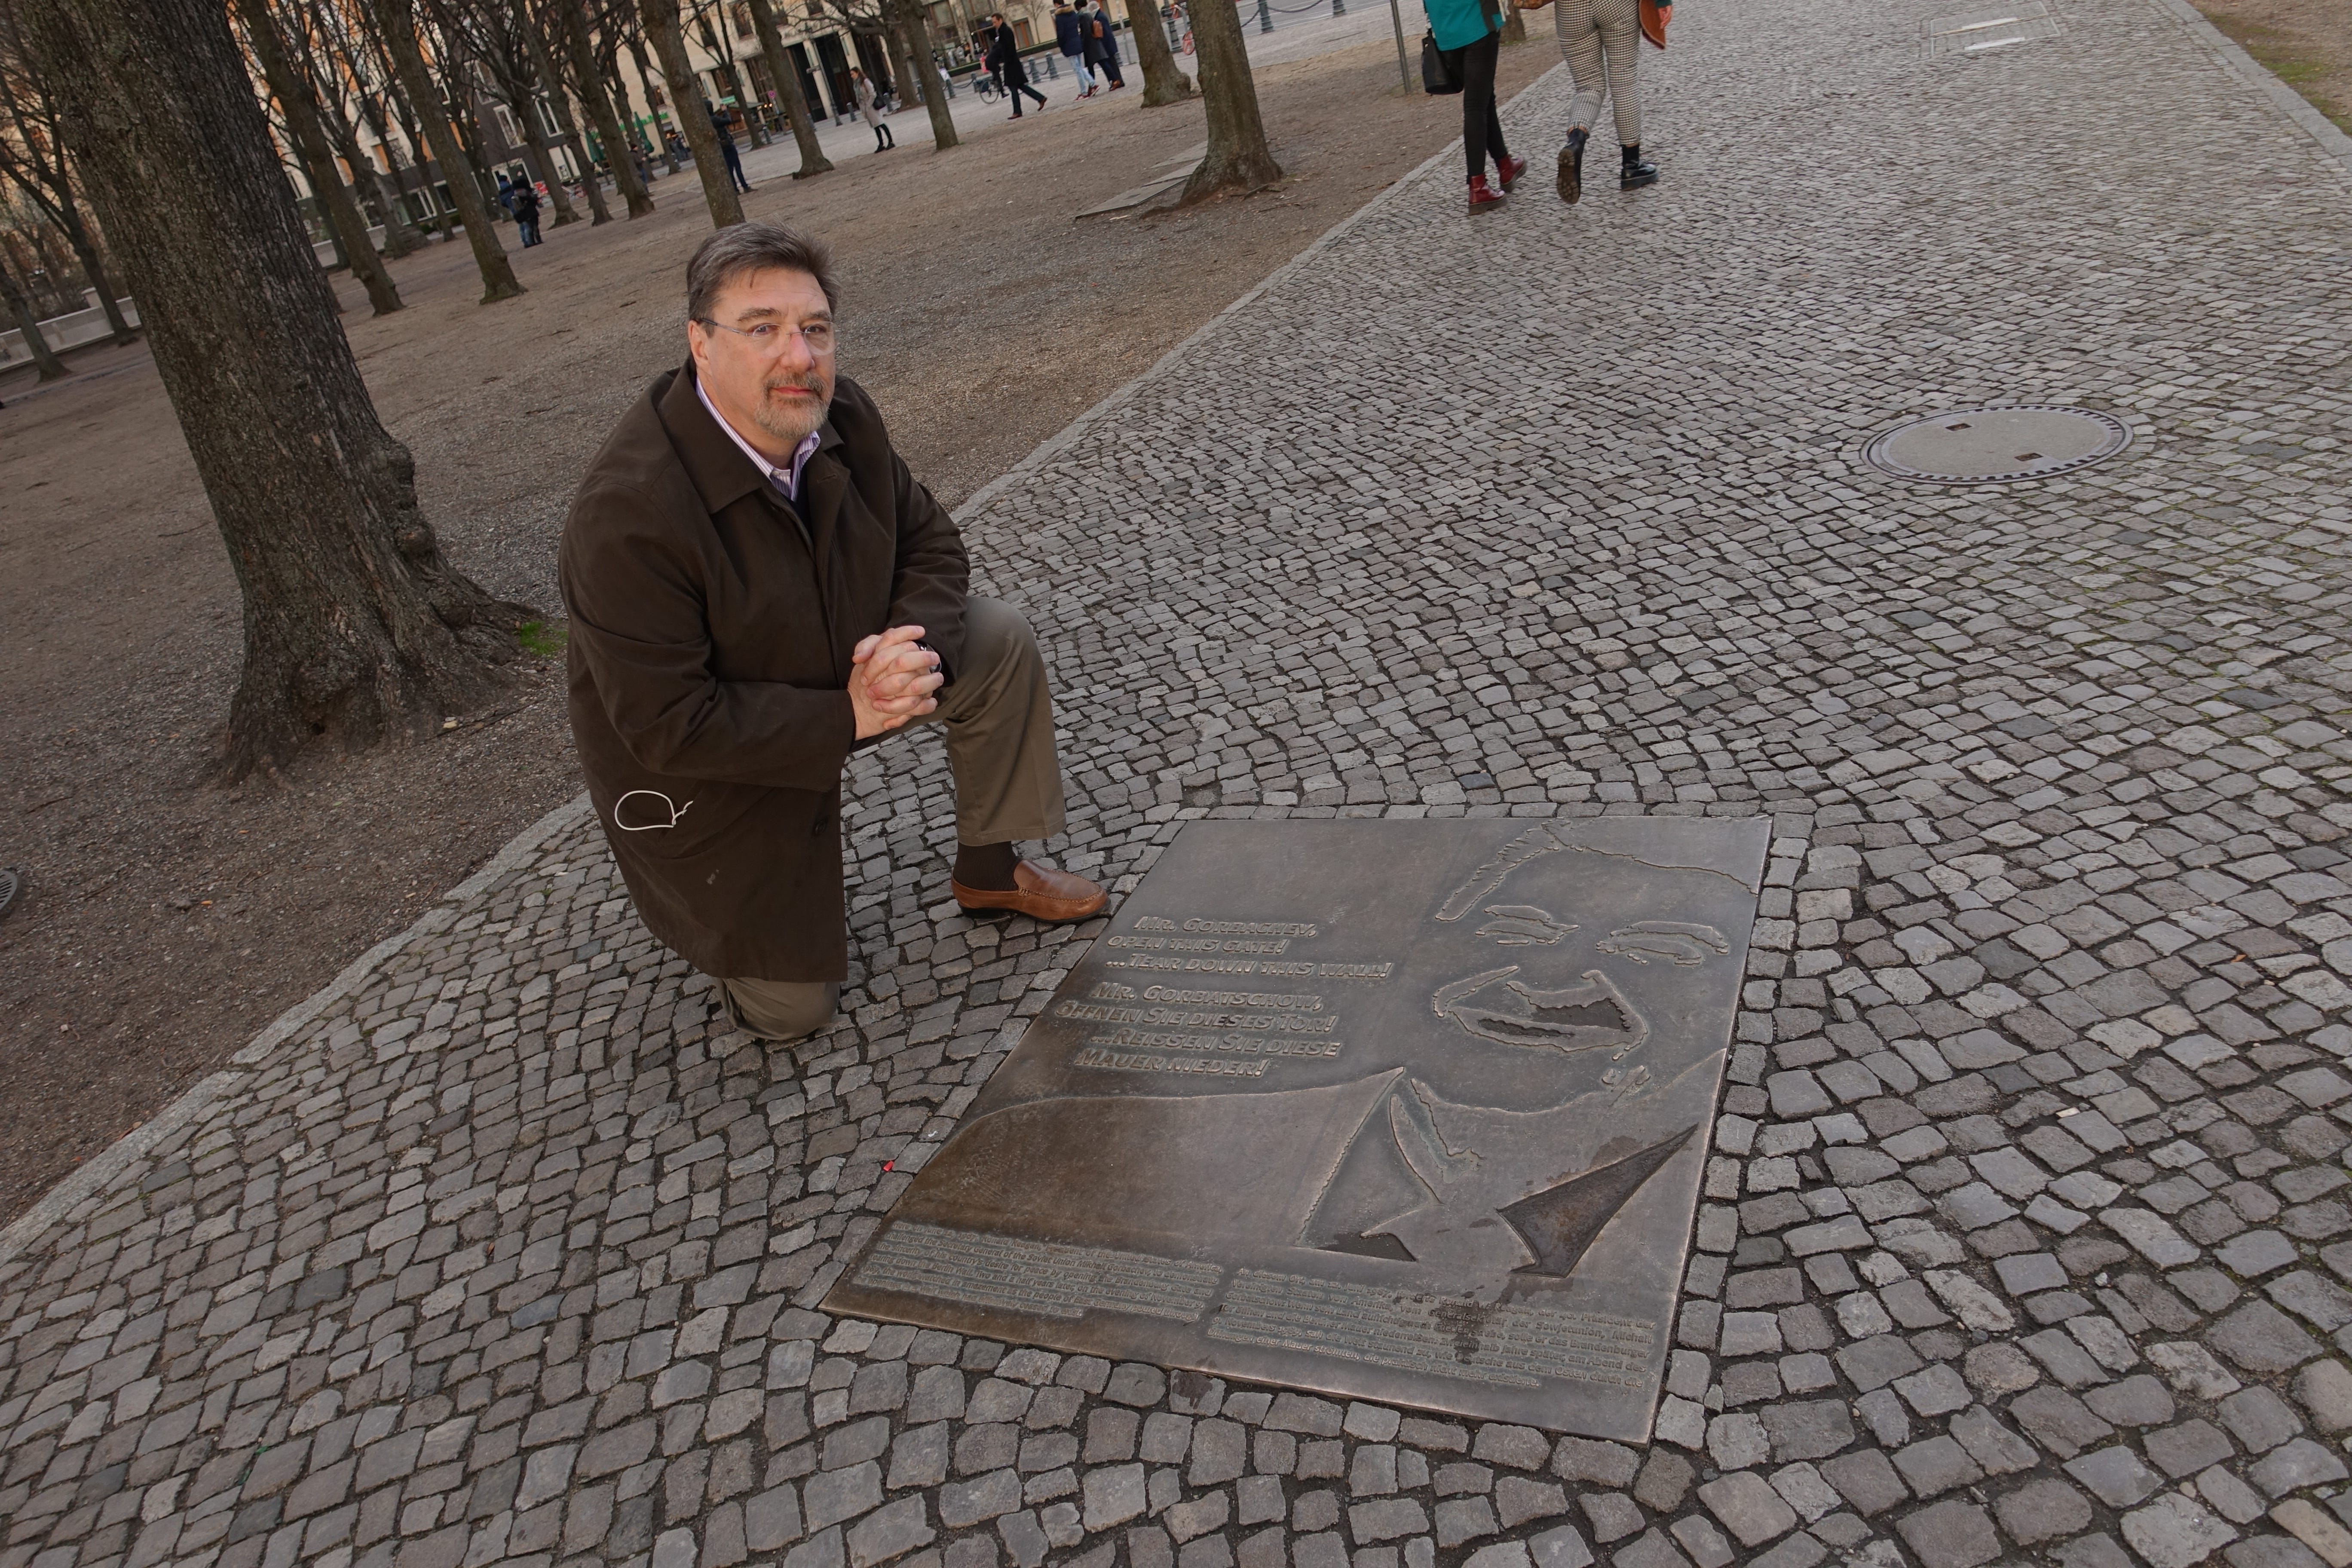 Author in Berlin on March 26, 2019, at a memorial to President Ronald Reagan where he gave his 